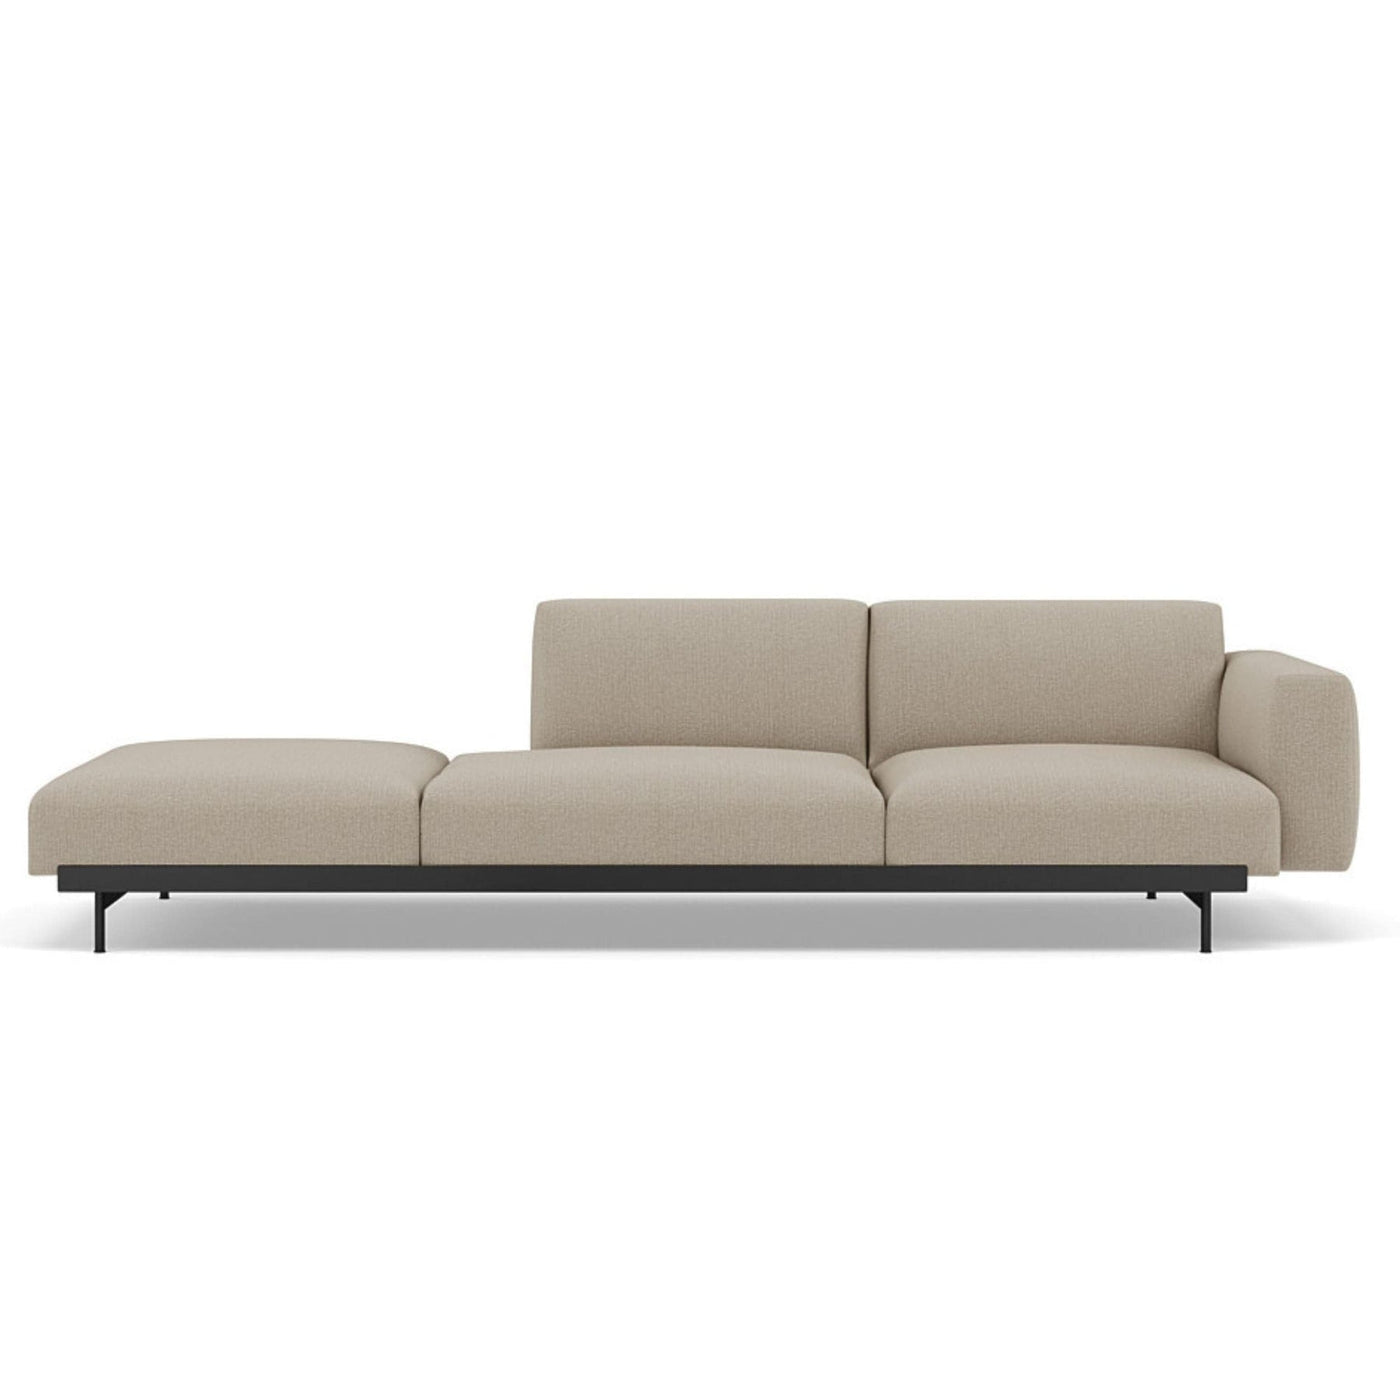 Muuto In Situ Modular 3 Seater Sofa, configuration 4. Made to order from someday designs. #colour_clay-10